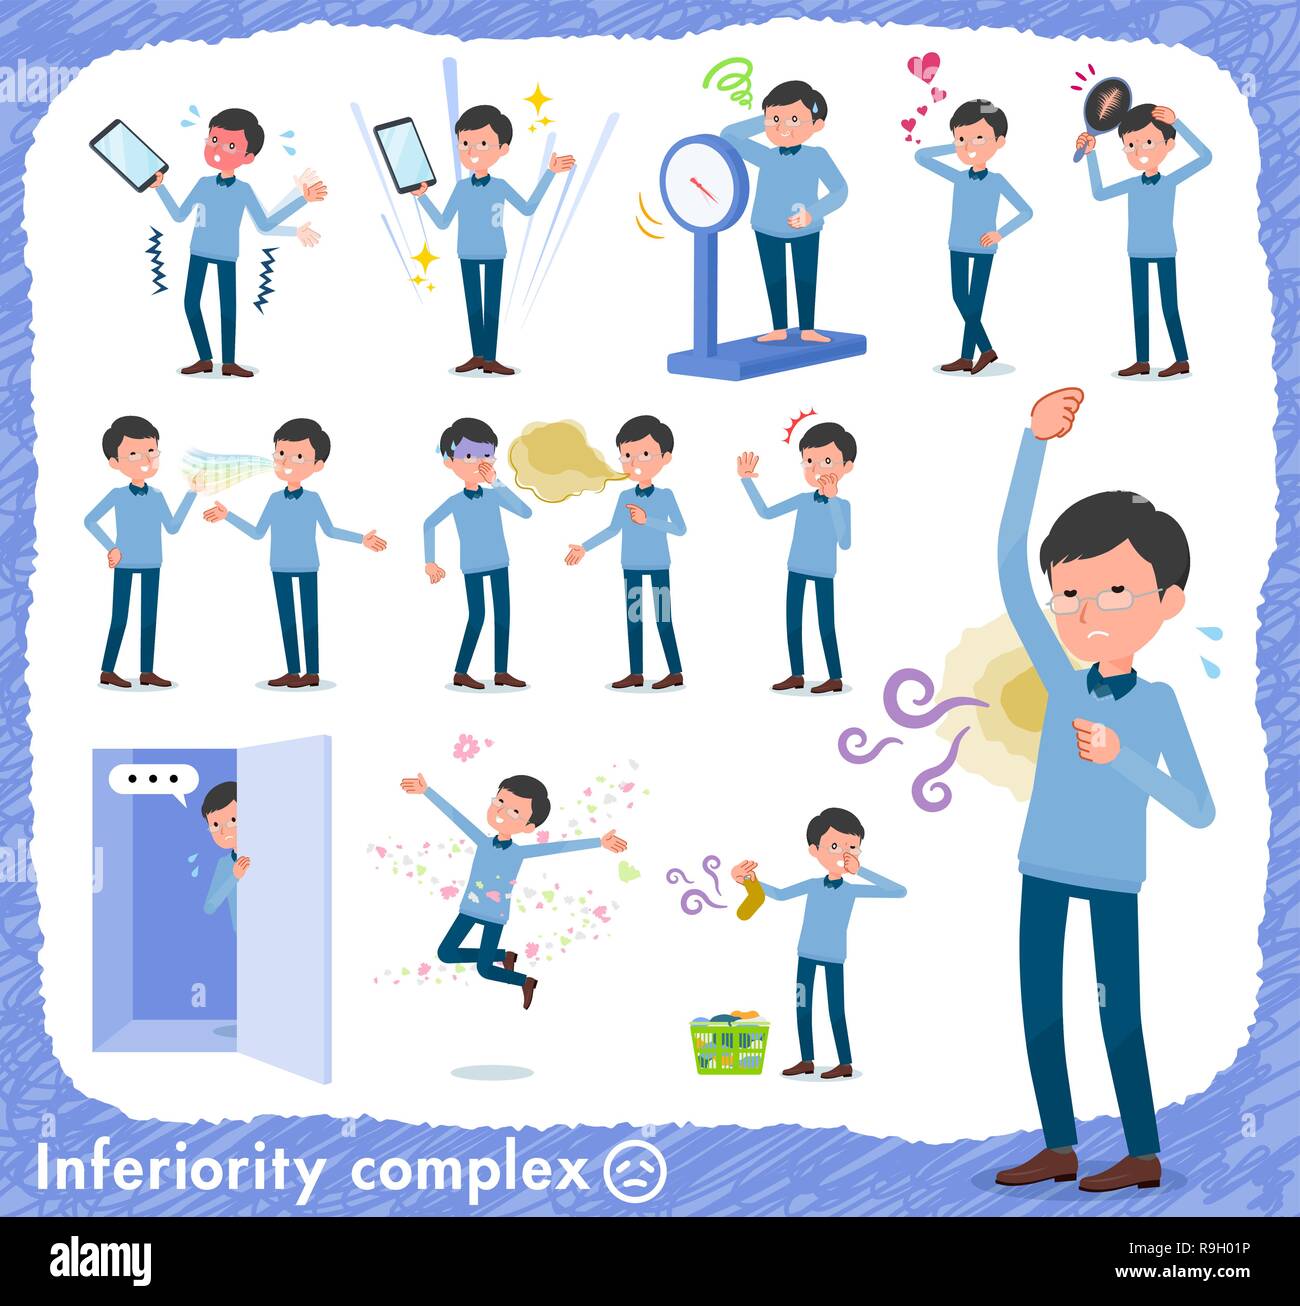 A set of man on inferiority complex.There are actions suffering from smell and appearance.It's vector art so it's easy to edit. Stock Vector